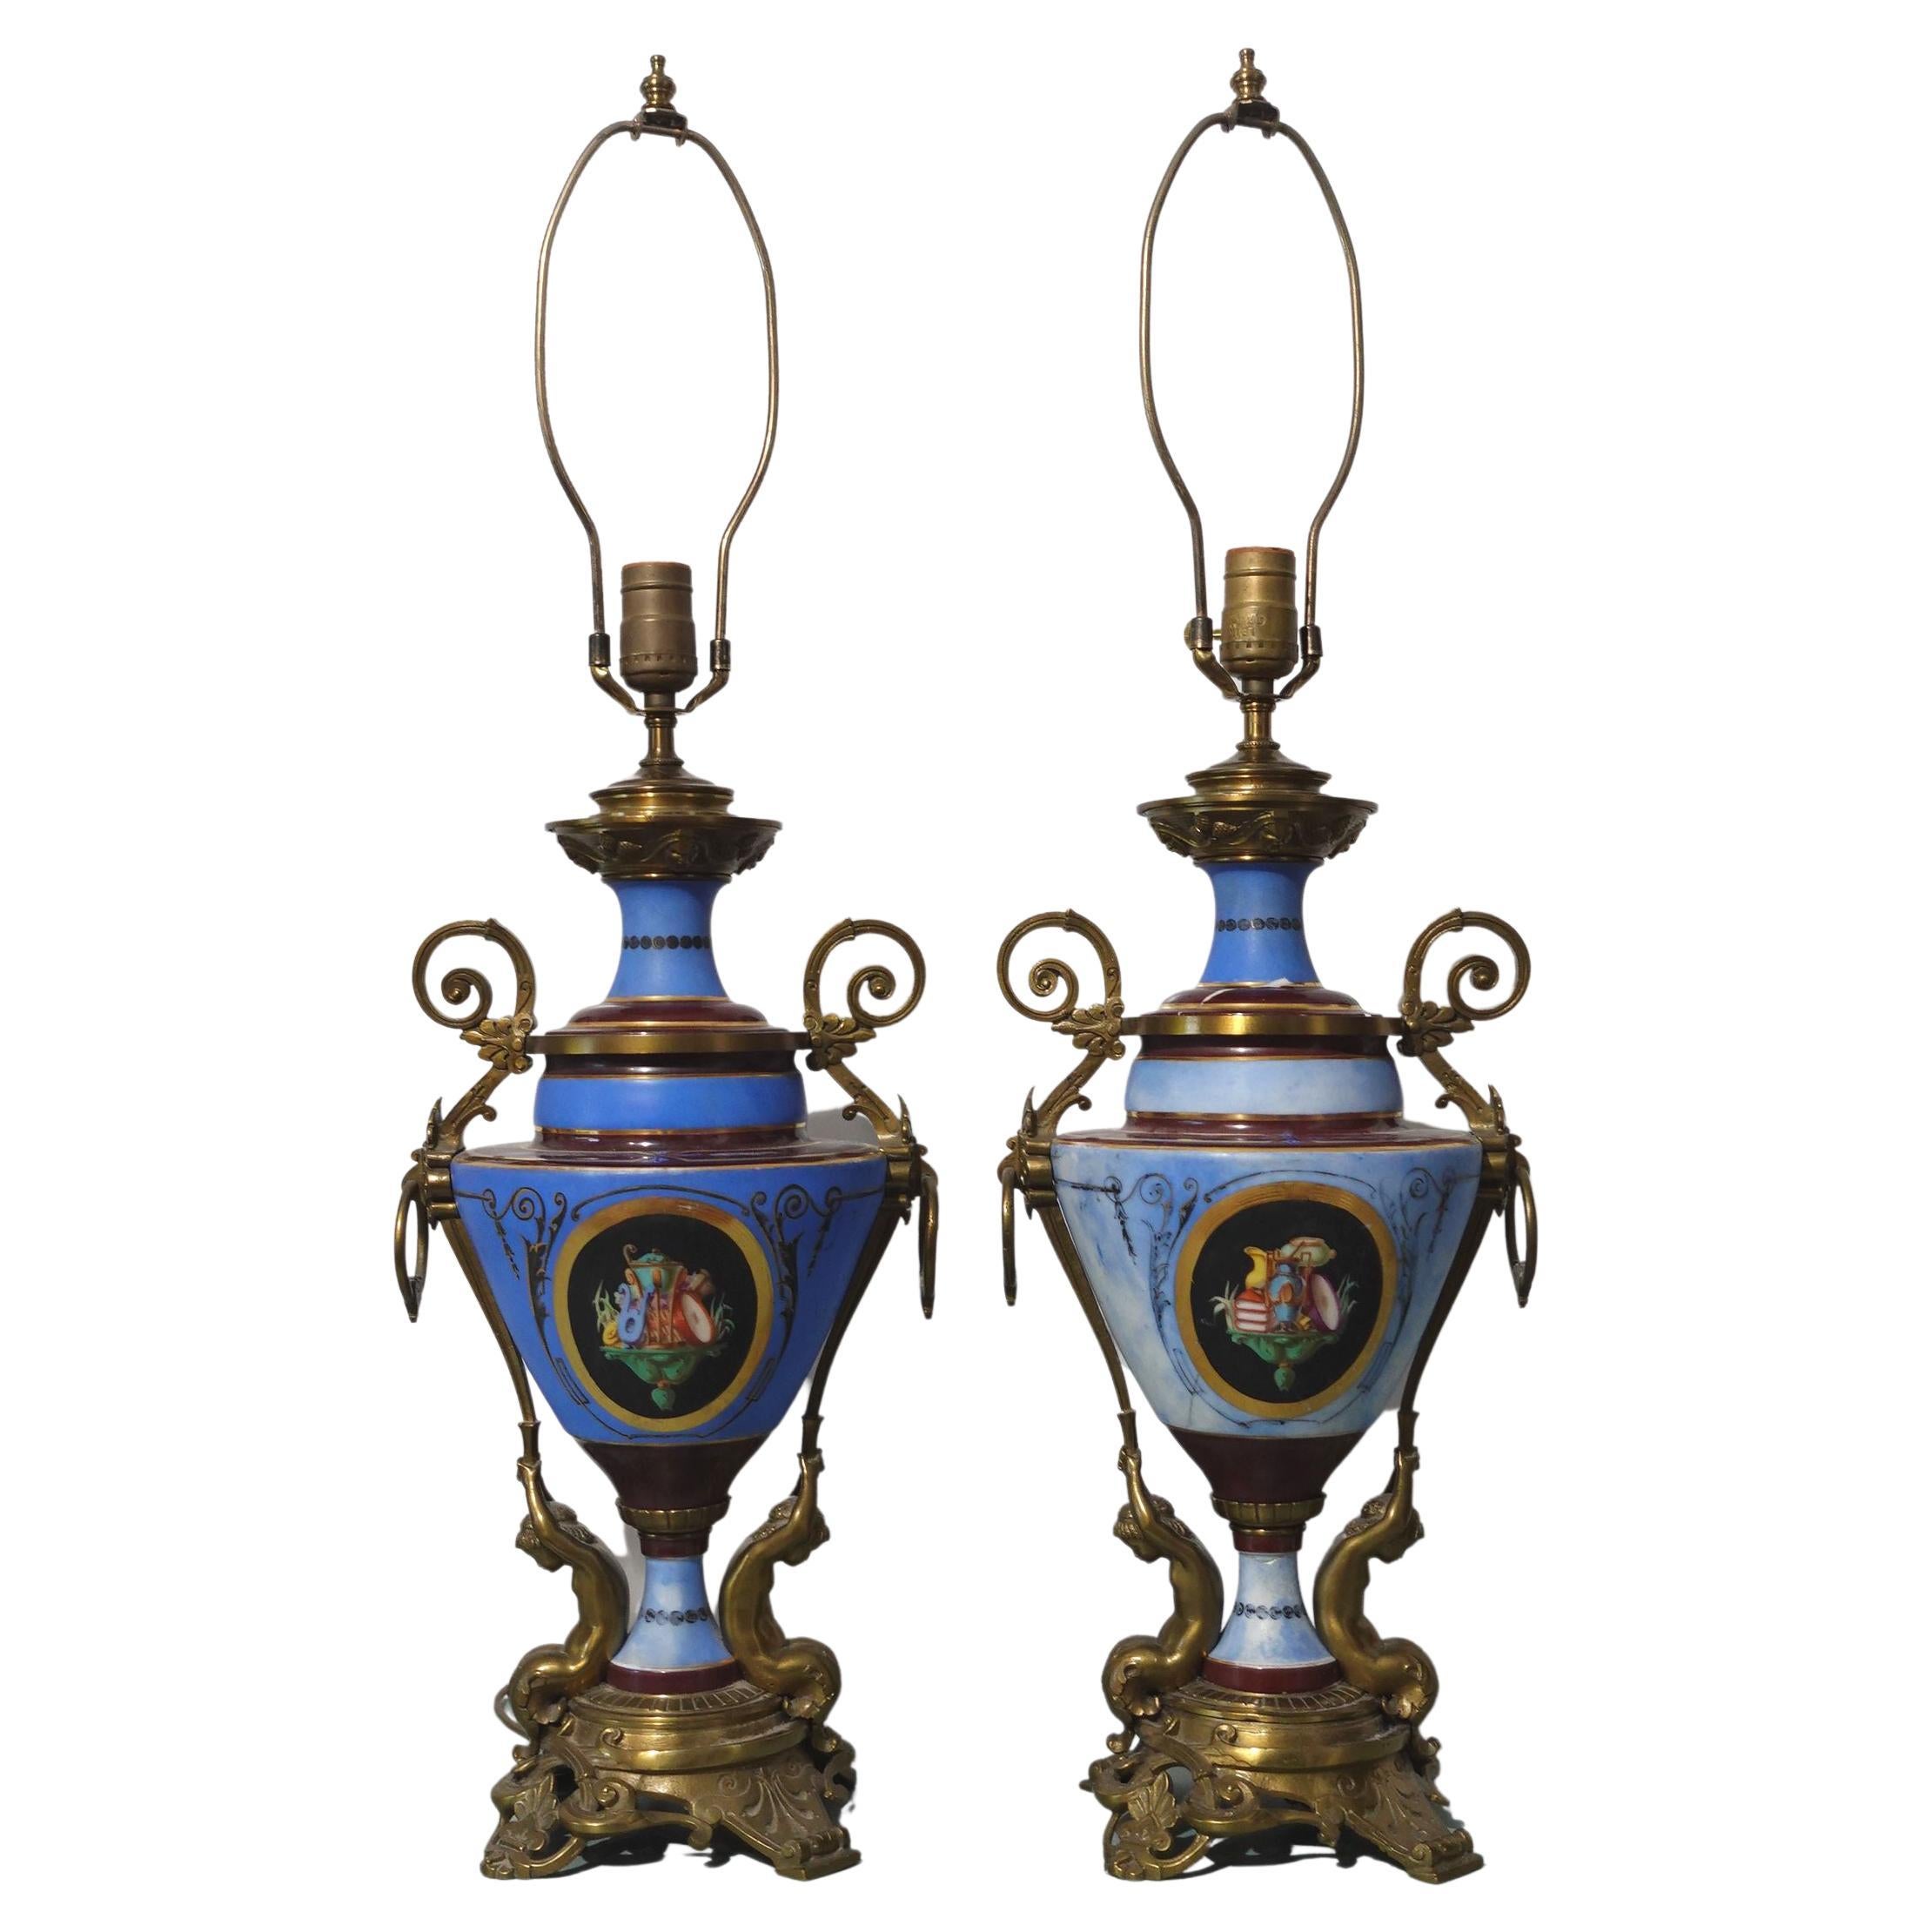 Pair of Neoclassical Style Porcelain and Gilt-Bronze Table Lamps For Sale